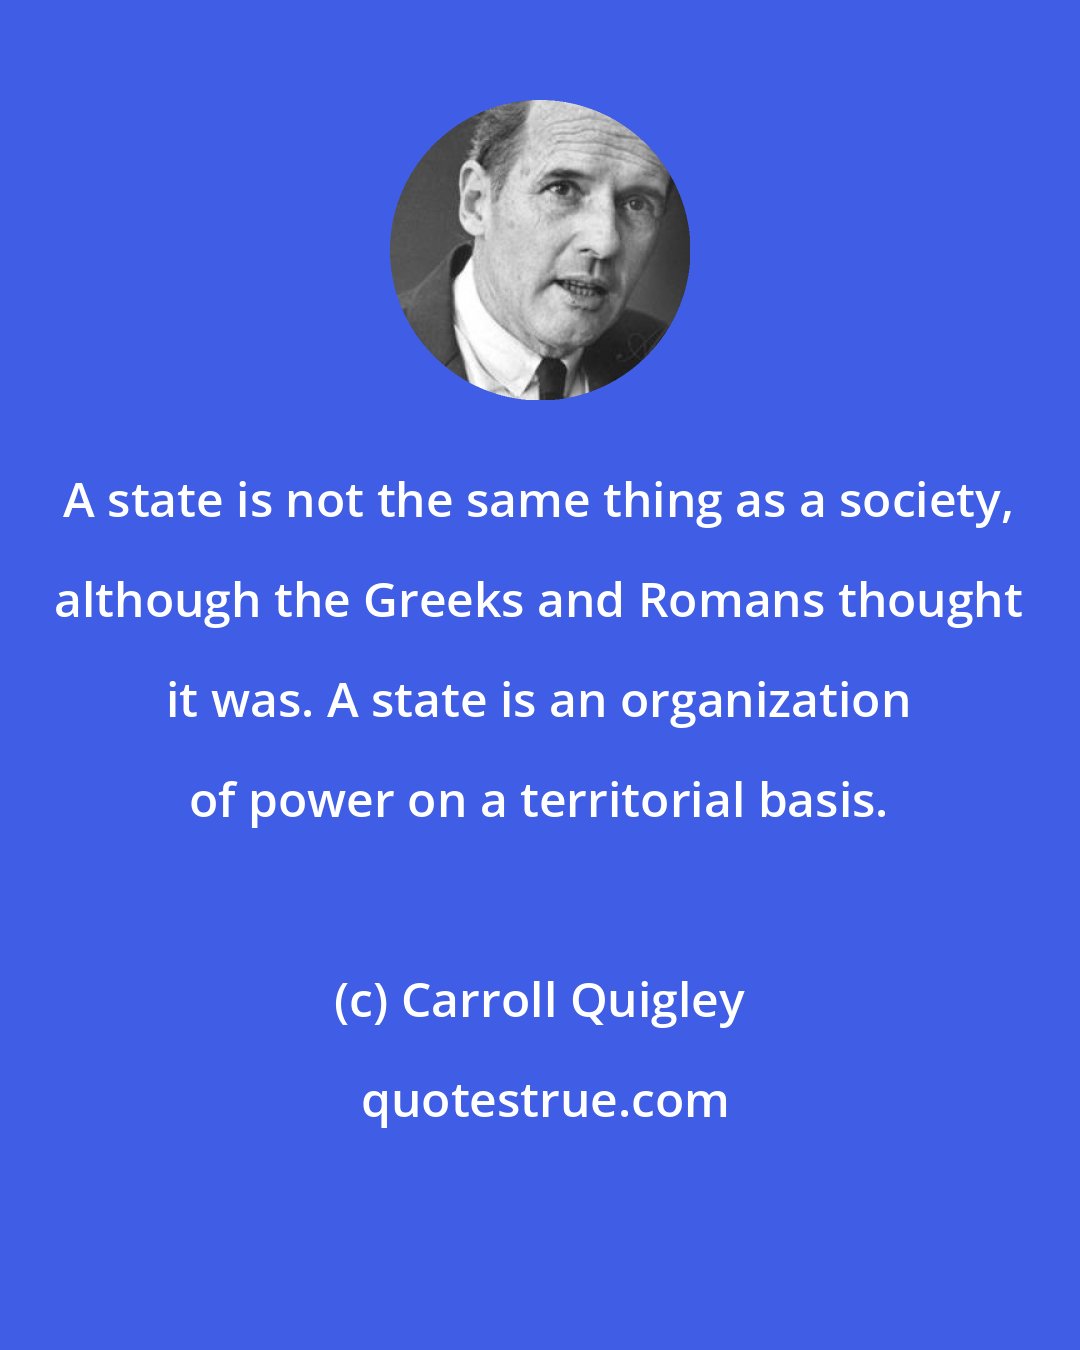 Carroll Quigley: A state is not the same thing as a society, although the Greeks and Romans thought it was. A state is an organization of power on a territorial basis.